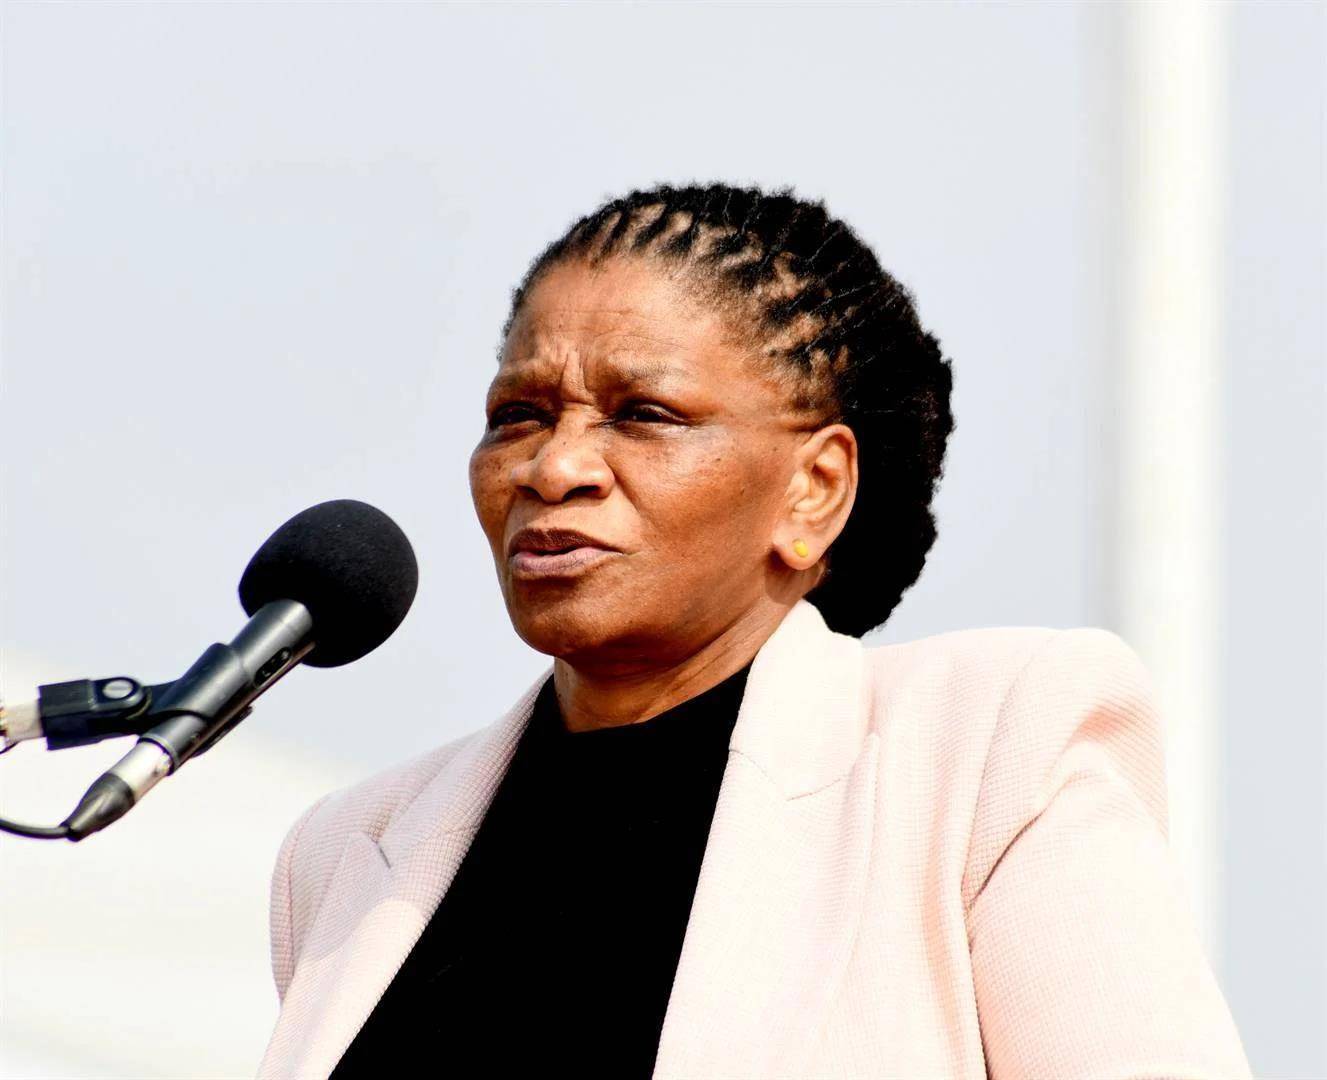 Minister Thandi Modise rubbished claims that she is leaving the ANC. Photo by Gallo Images